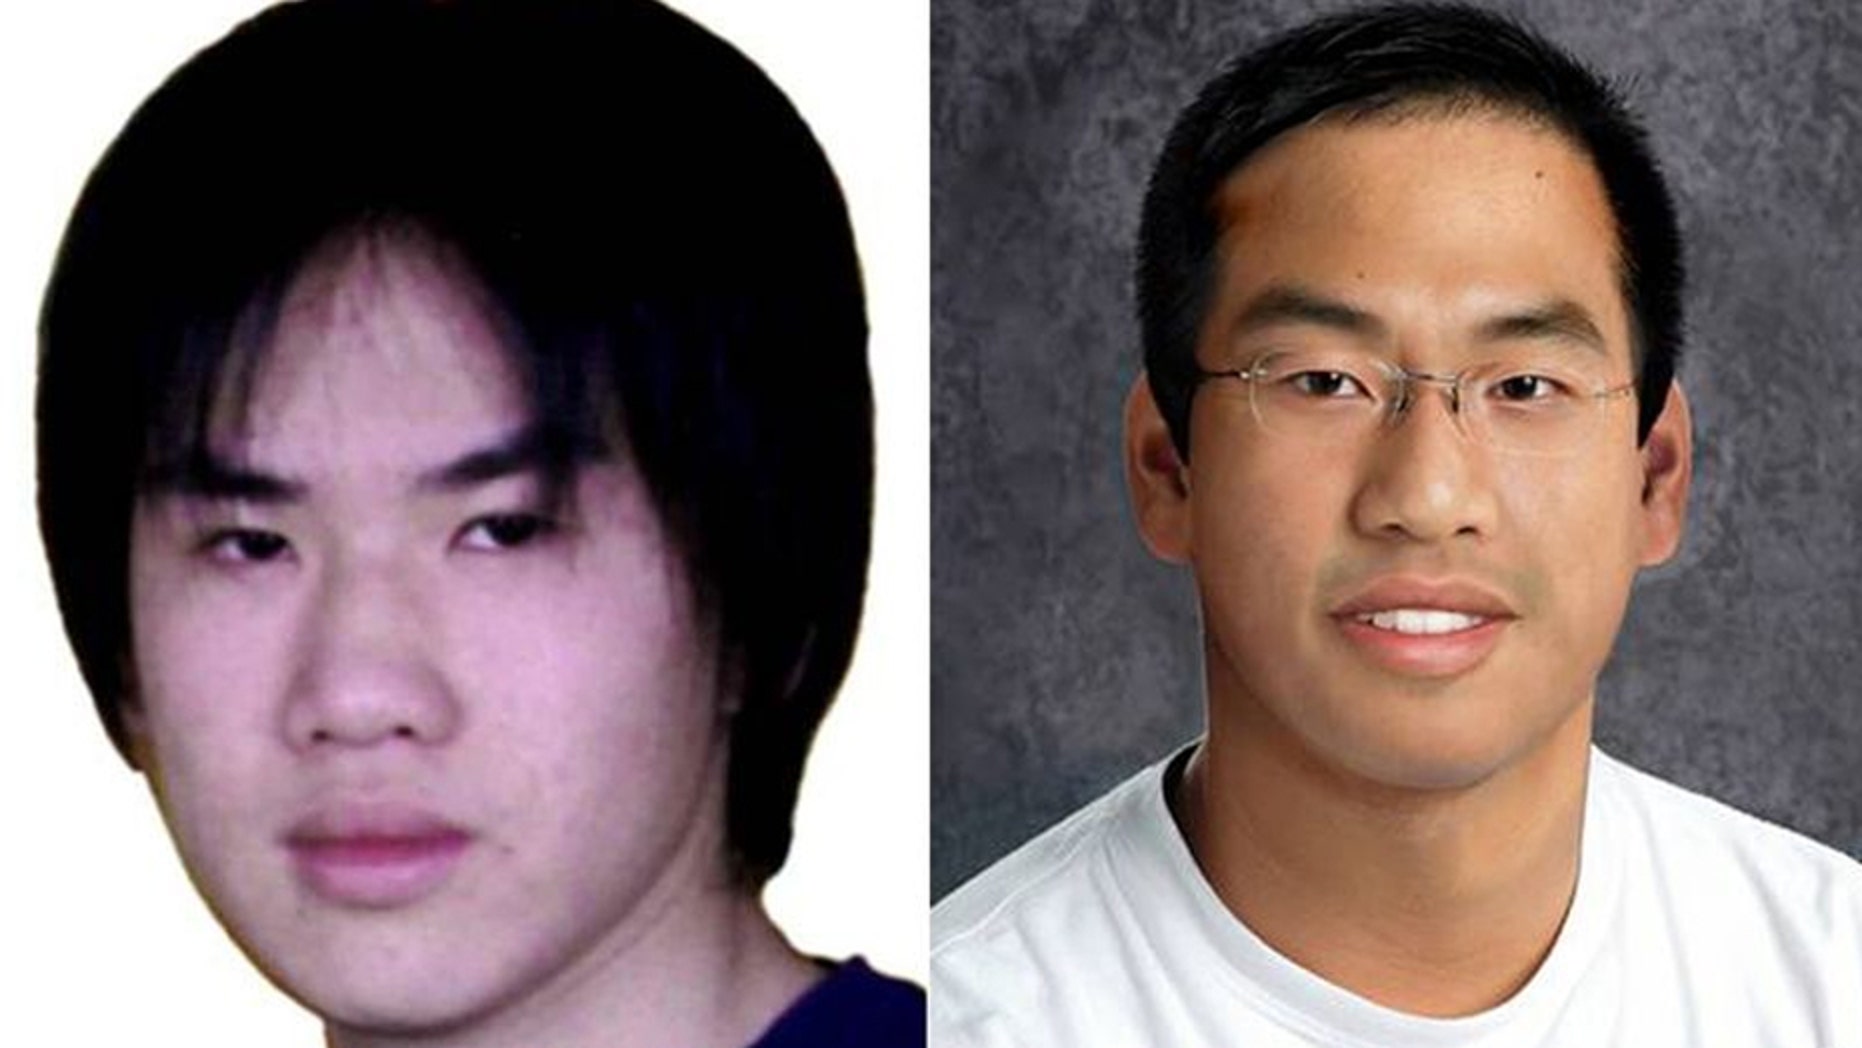 California teen who vanished nearly 15 years ago may have been spotted, private investigator says